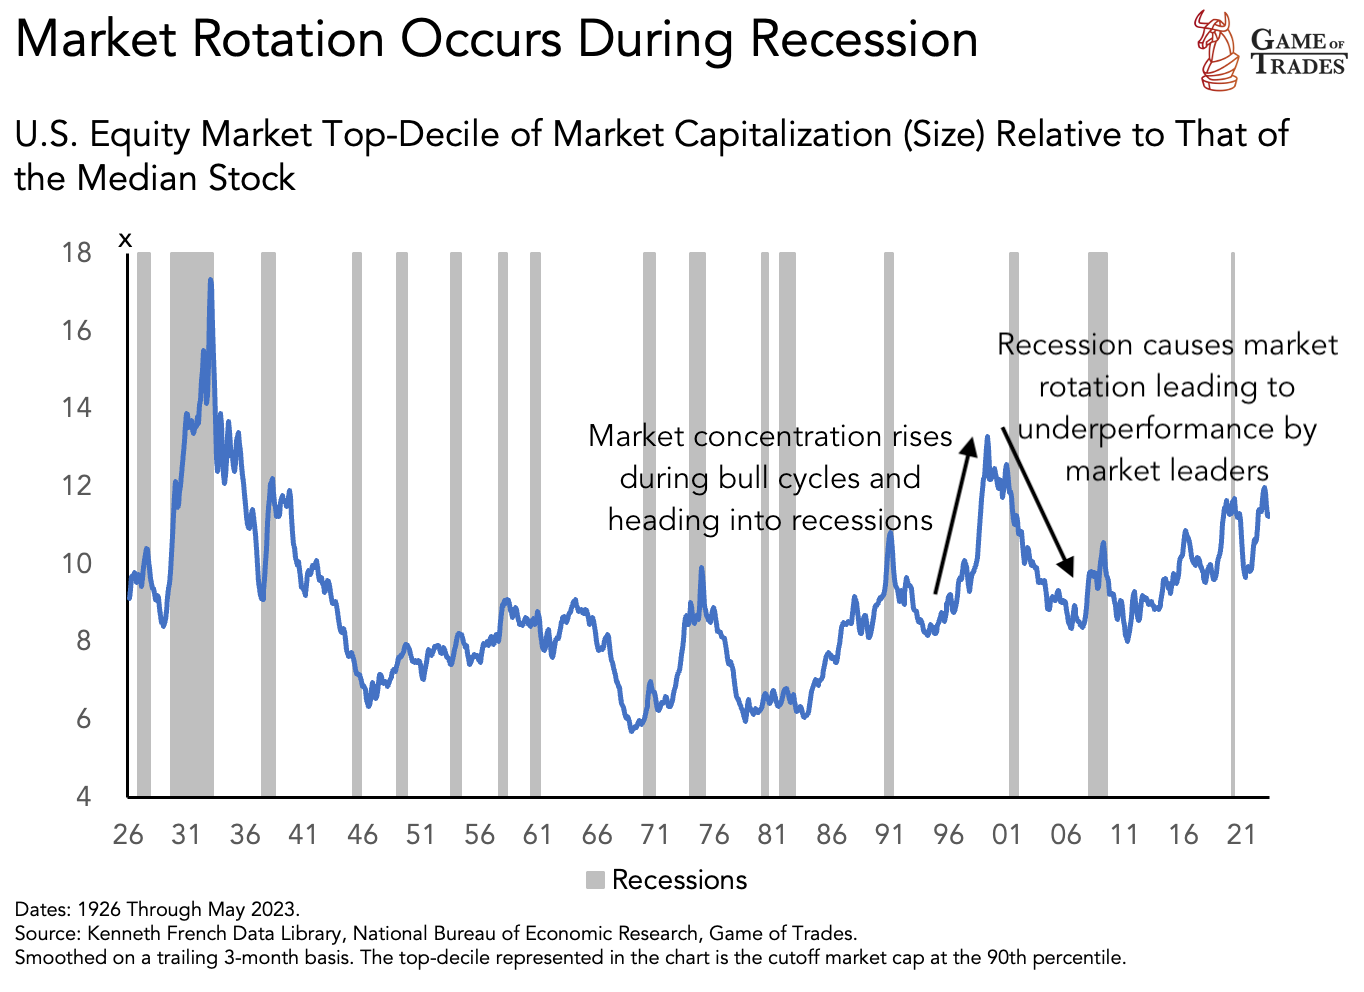 The impact of recession on US equity market